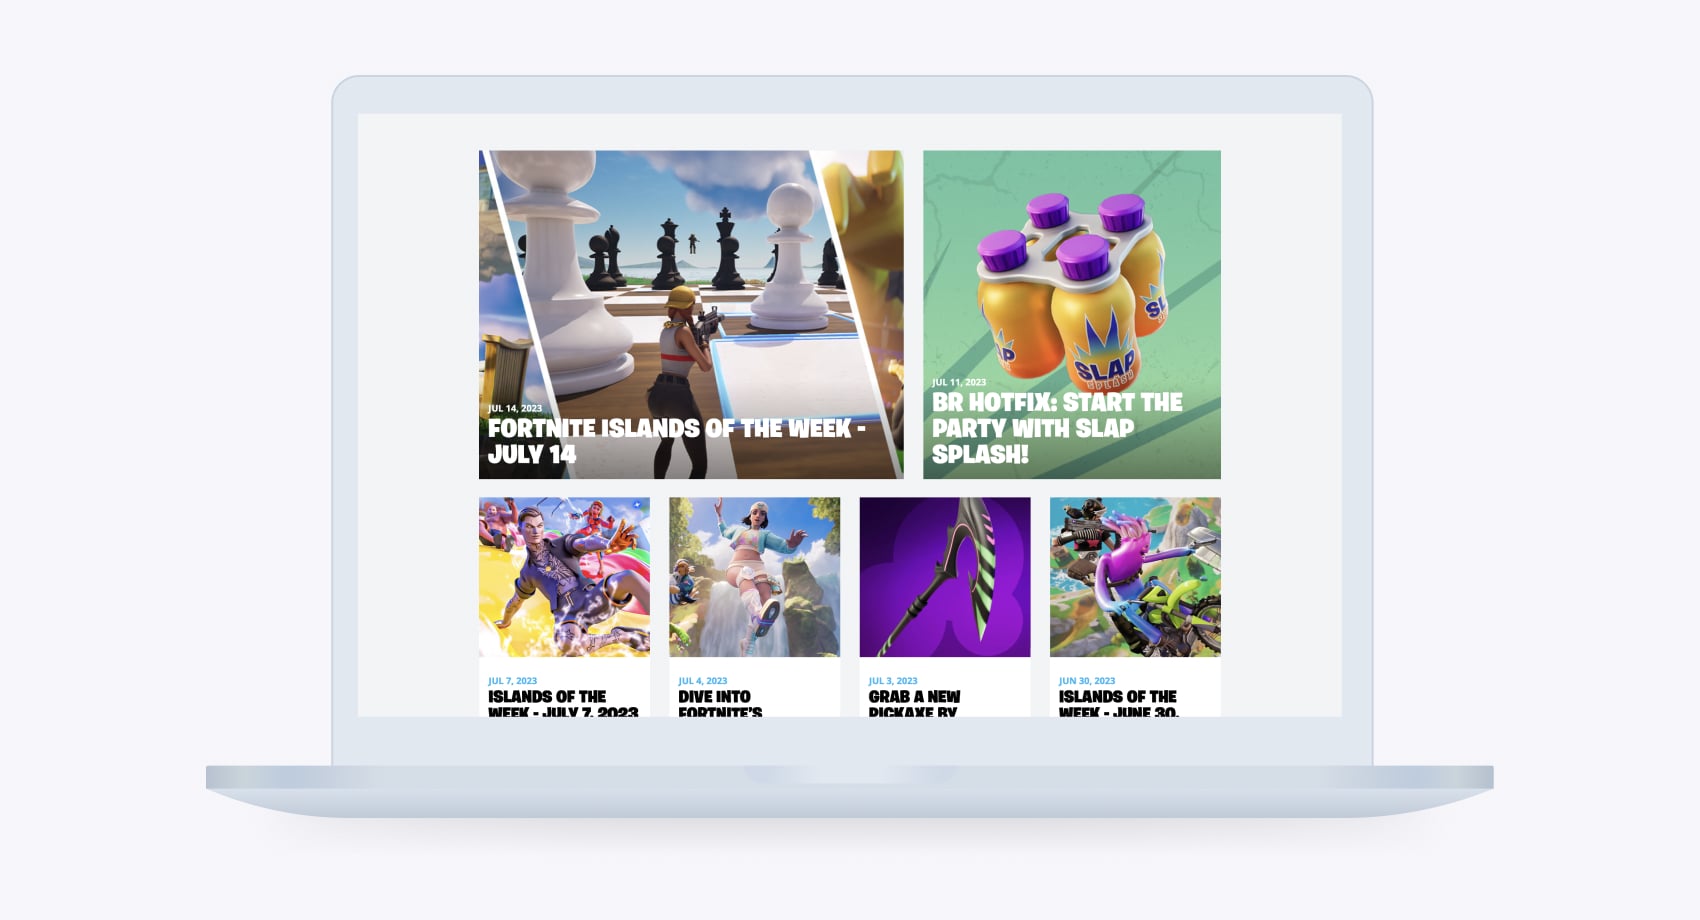 The example of Fortnite communications